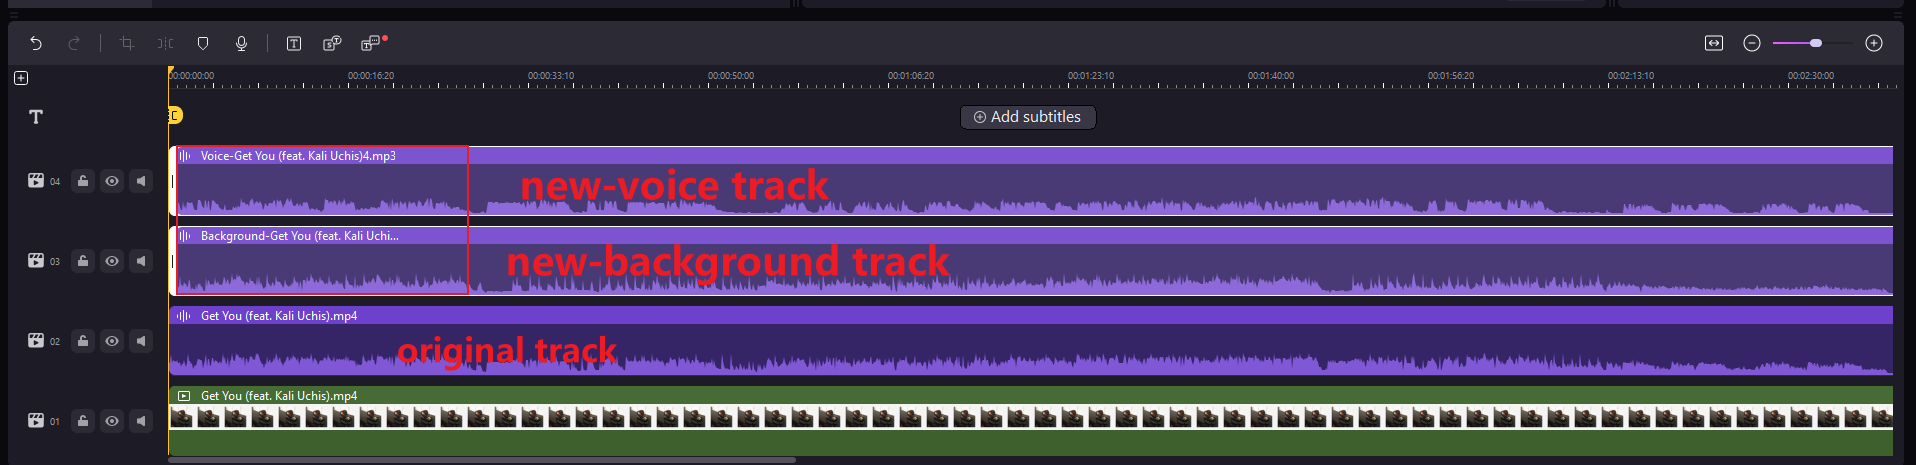 two voice tracks generated